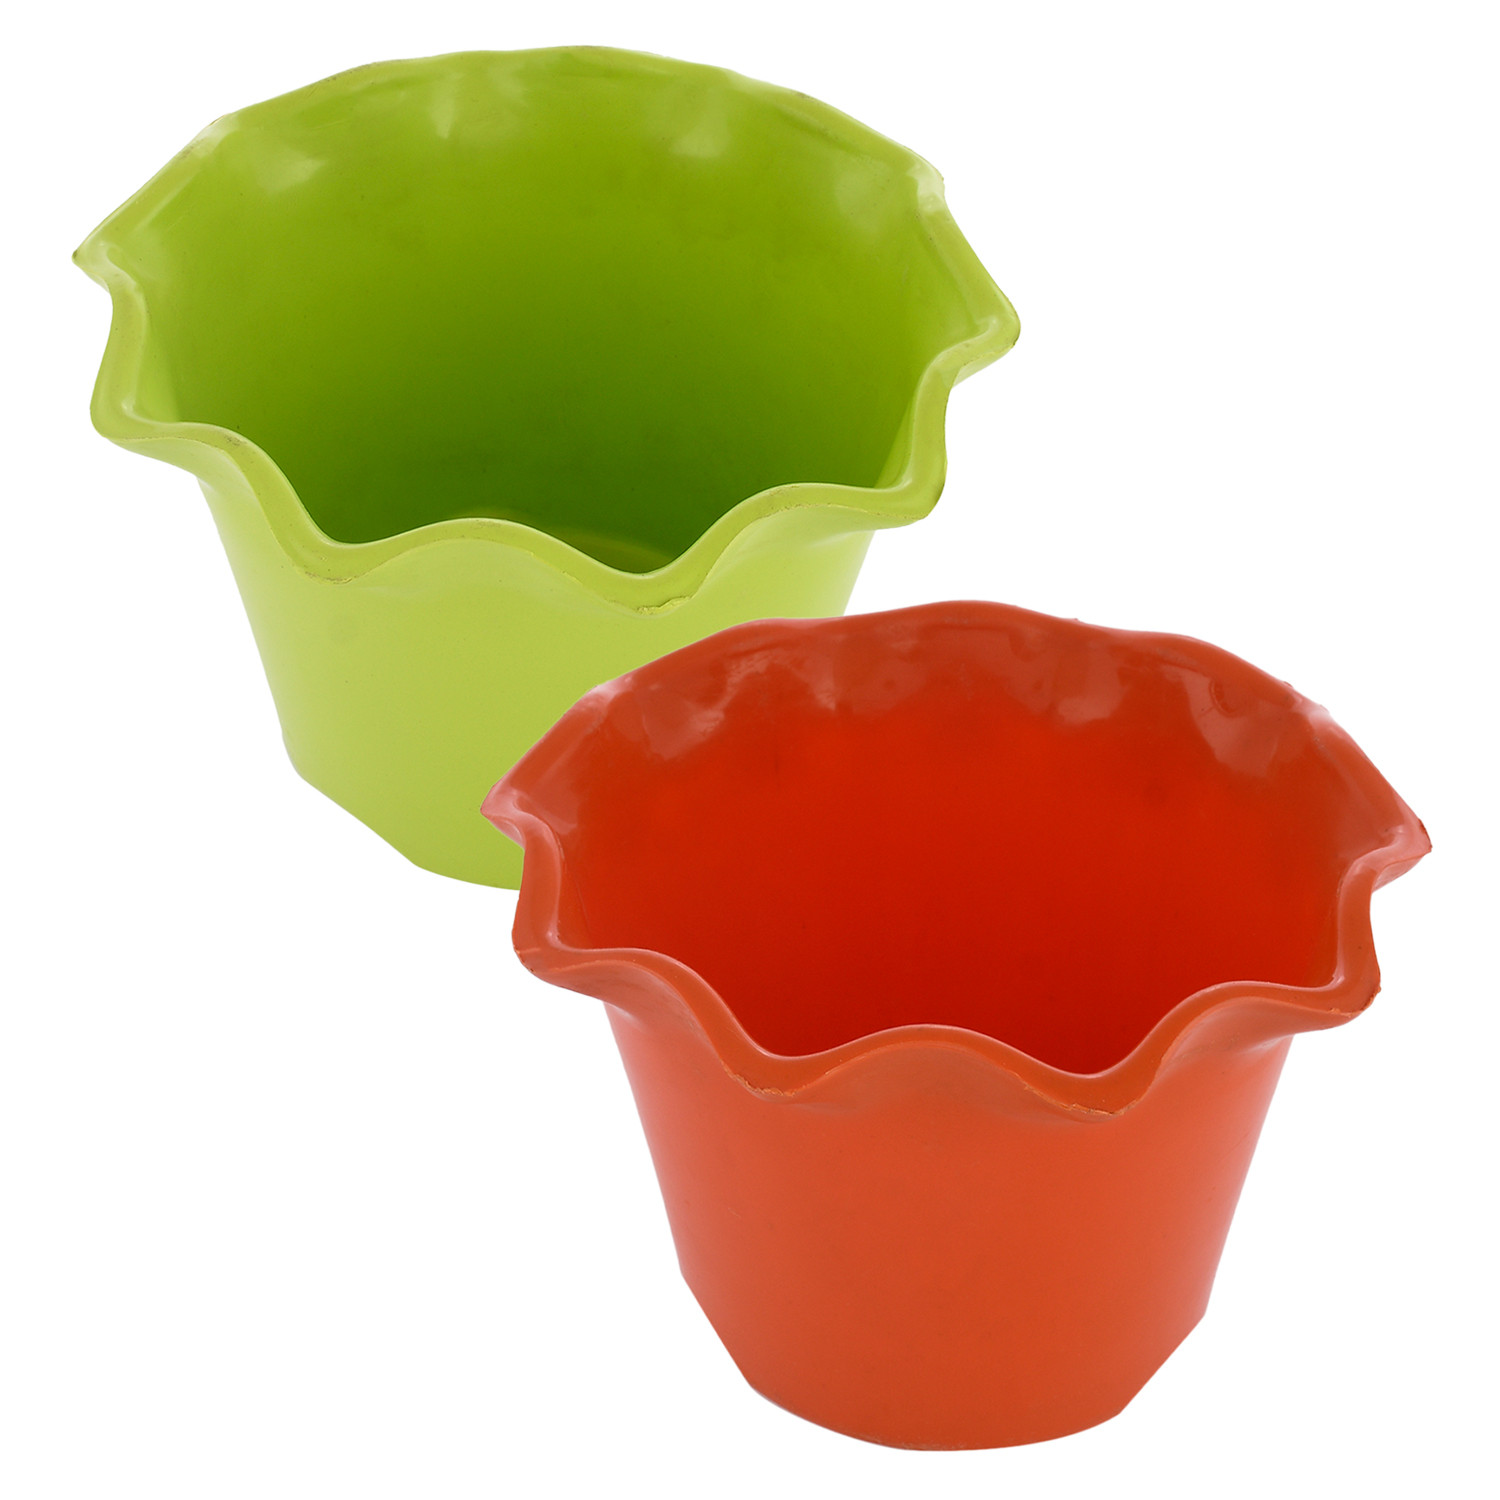 Kuber Industries Blossom Flower Pot|Durable Plastic Flower Pot|Gamla With Drain Holes for Home Décor|Balcony|Garden|8 Inch|Pack of 2 (Orange & Green)